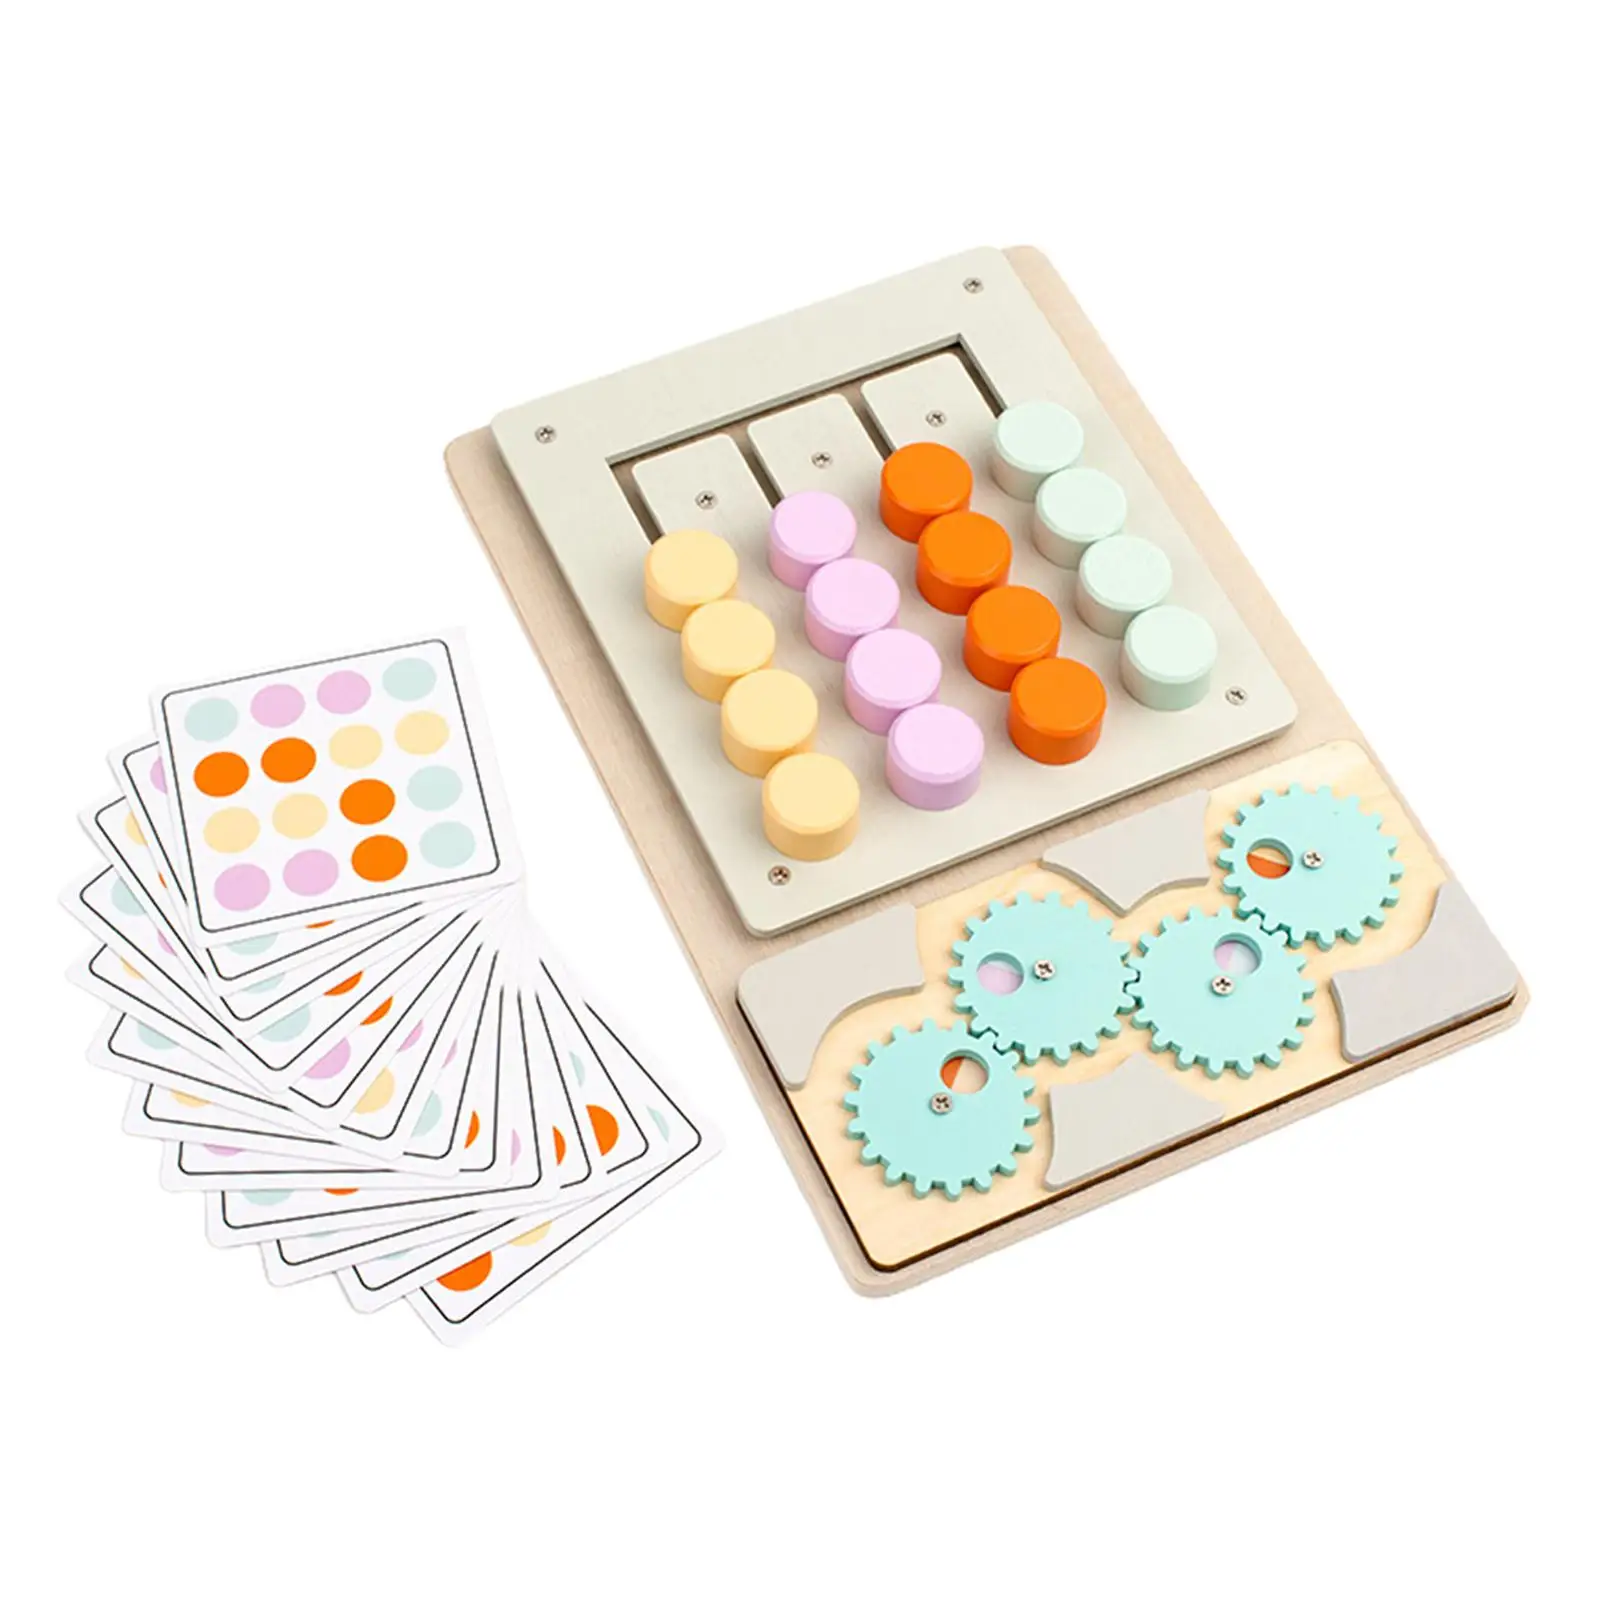 Wooden Sliding Puzzle Color Sorting Memory Game Development Toy Montessori Educational for Boys Girls Birthday Gift Party Favors